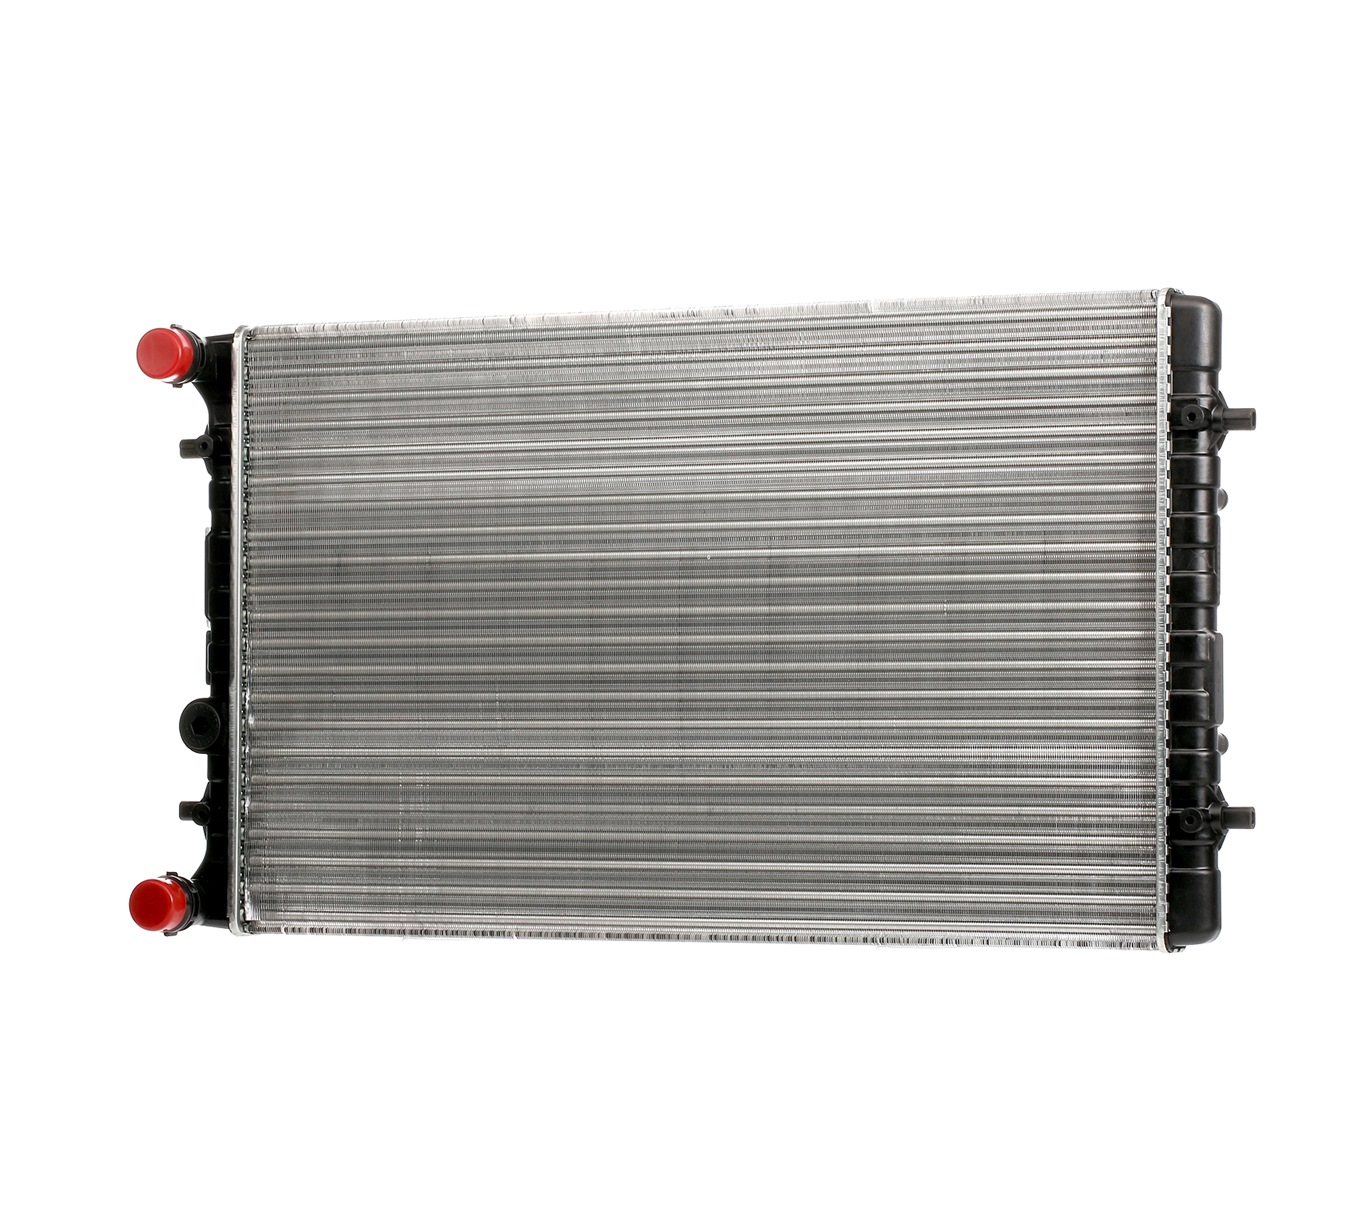 MAHLE ORIGINAL CR 368 001S Engine radiator for vehicles with/without air conditioning, 650 x 415 x 23 mm, Manual Transmission, Mechanically jointed cooling fins